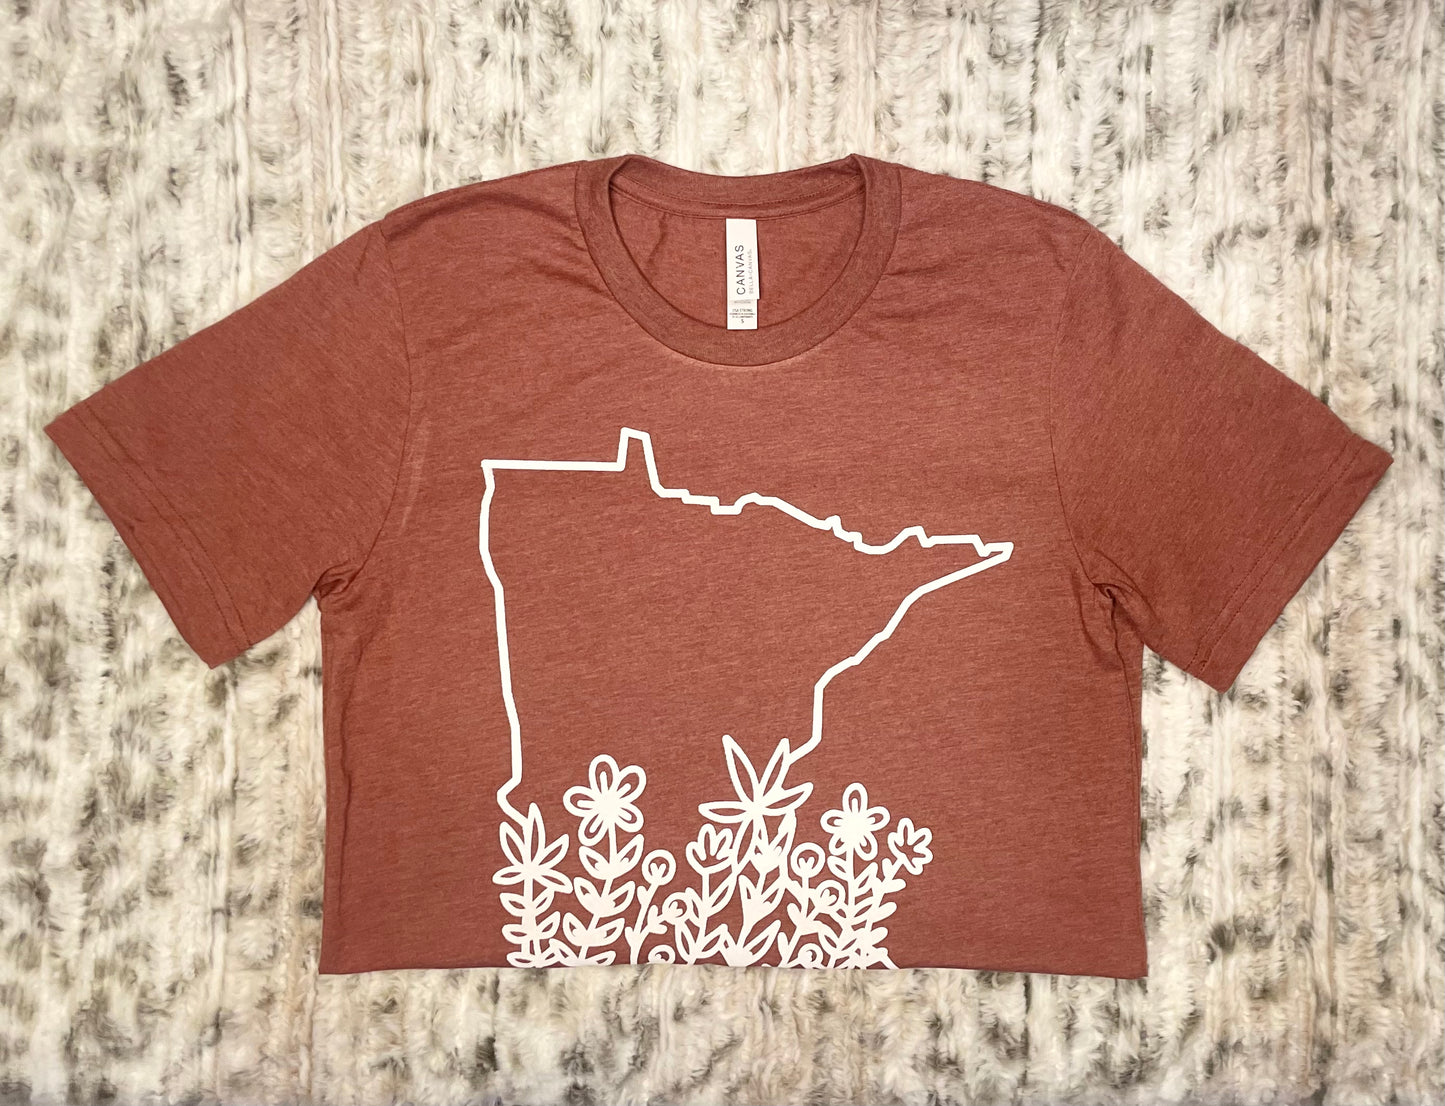 State of Minnesota outline with flowers ranging up the state in white on a heather clay shirt by bella canvas. Front view of the t-shirt on a cute background.